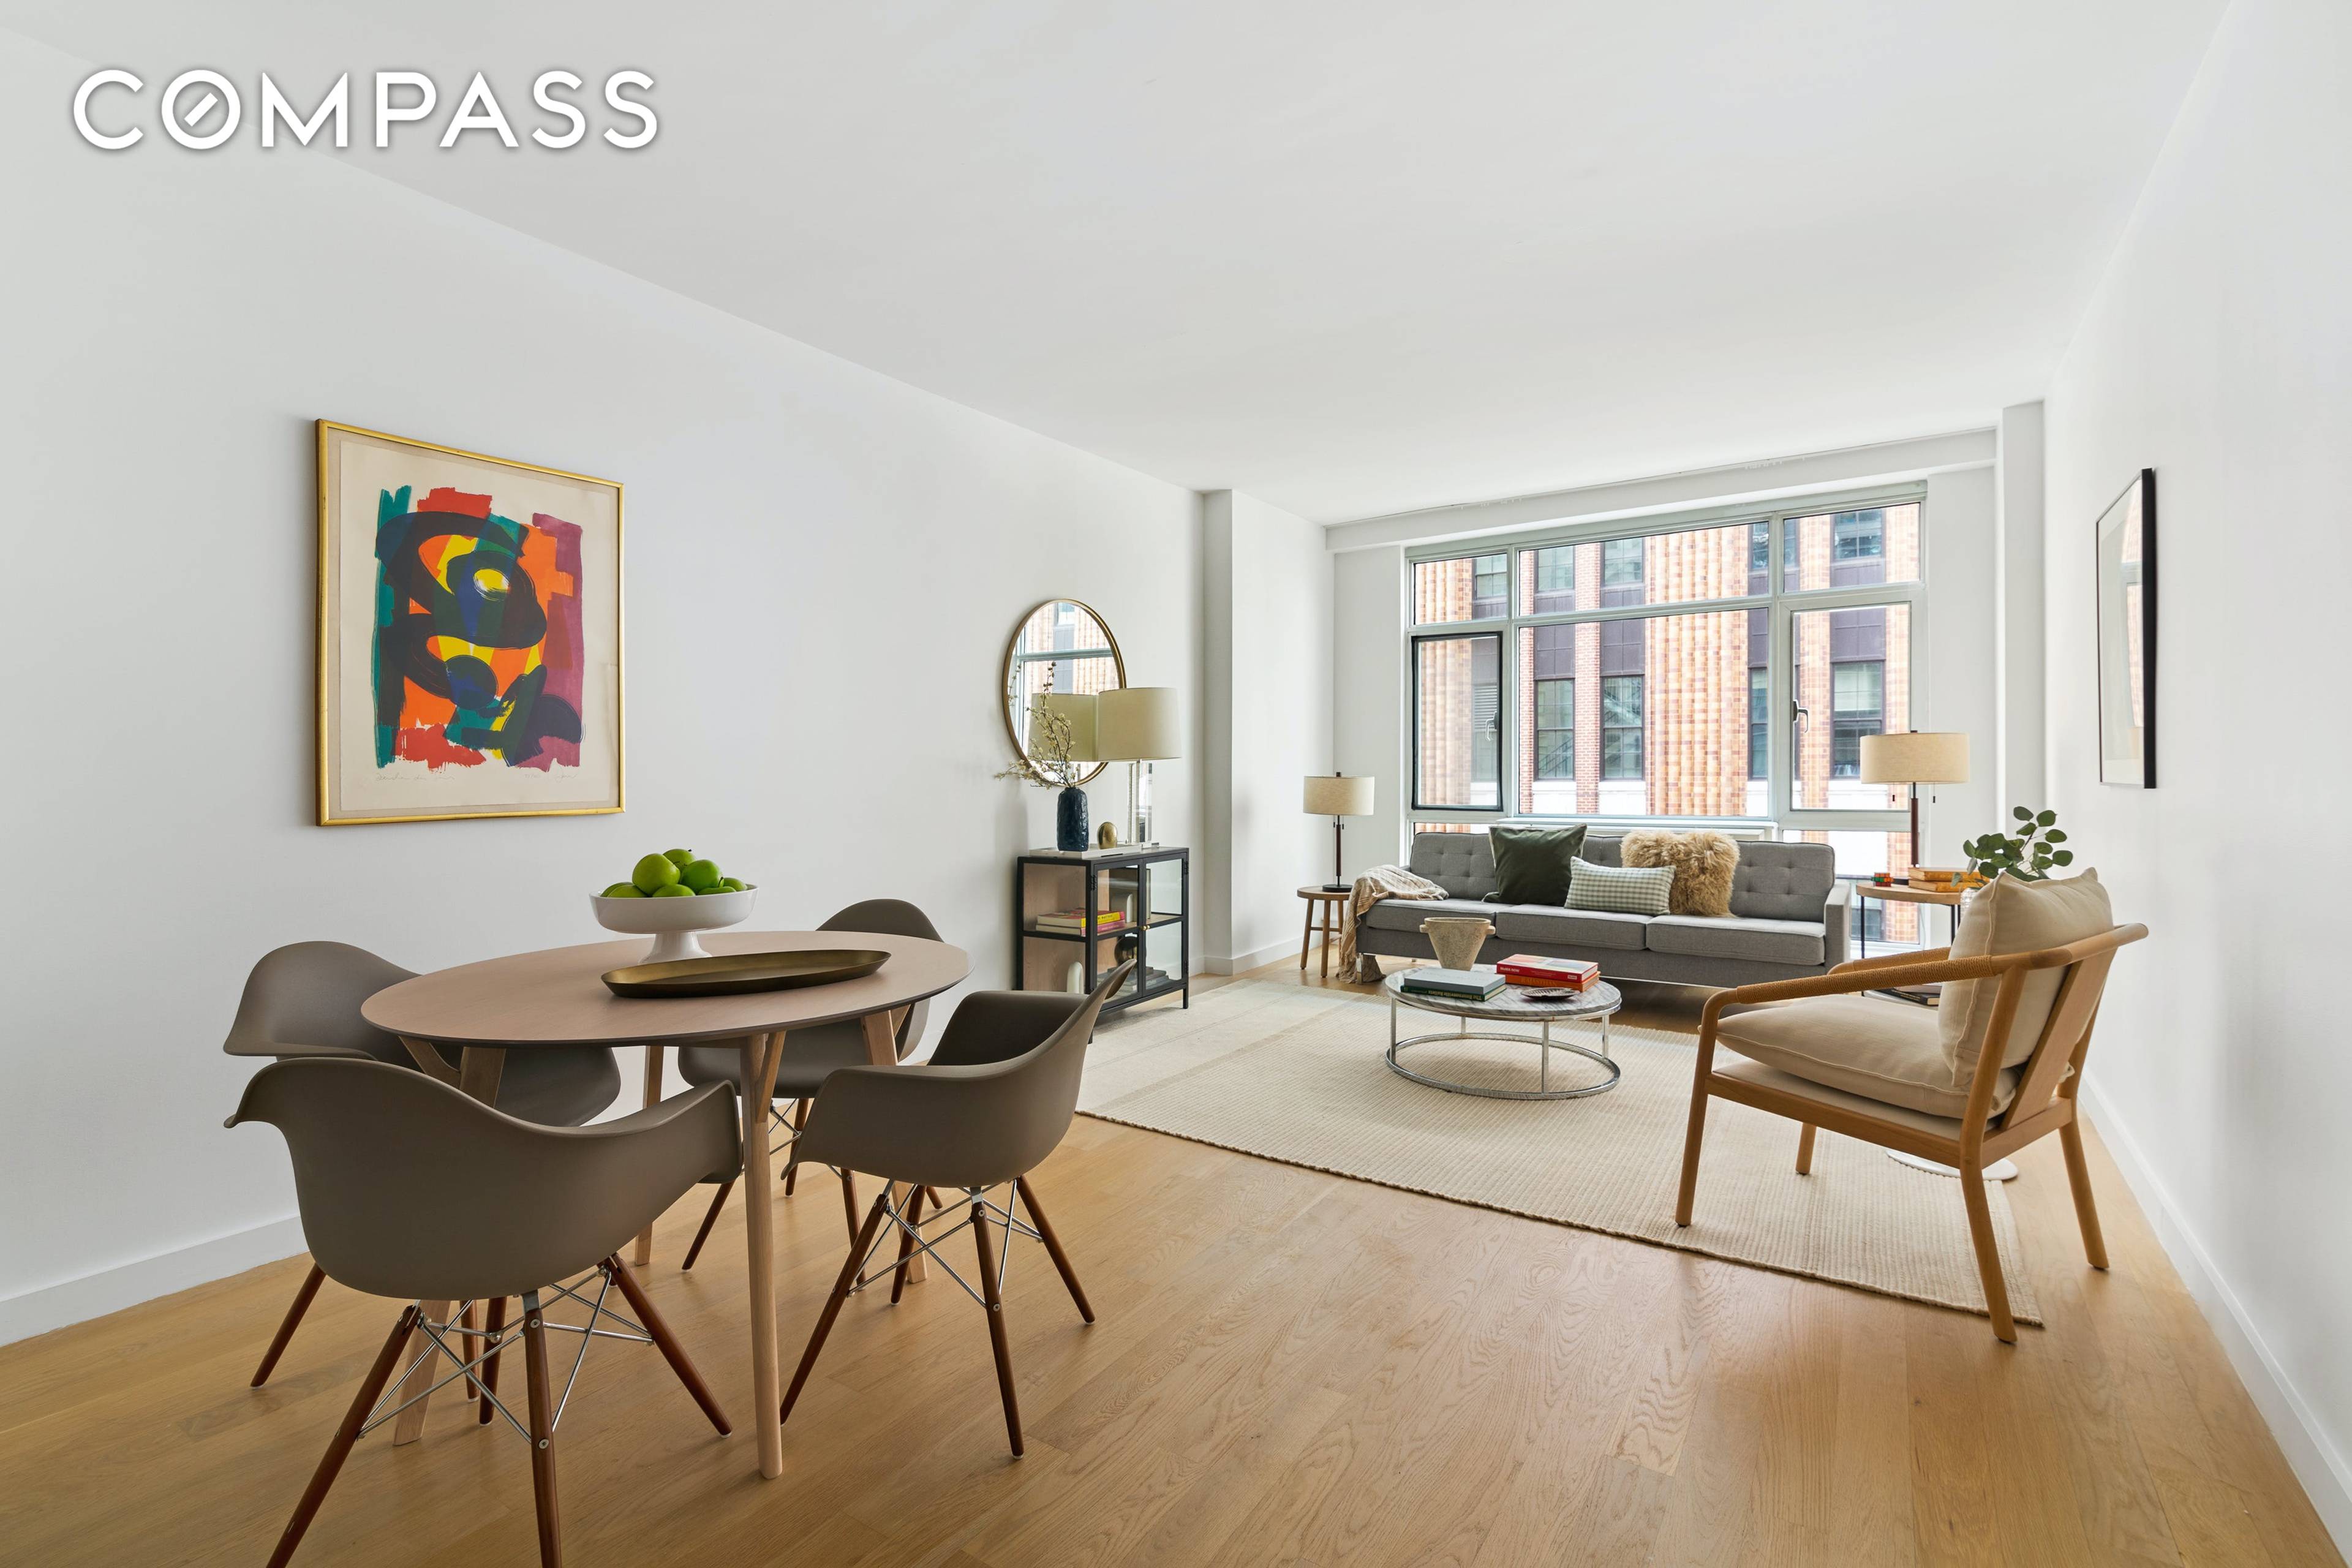 Beautiful 2 bedroom 1 bath condo home in a centrally located full service building straddling Boerum Hill and Downtown Brooklyn.